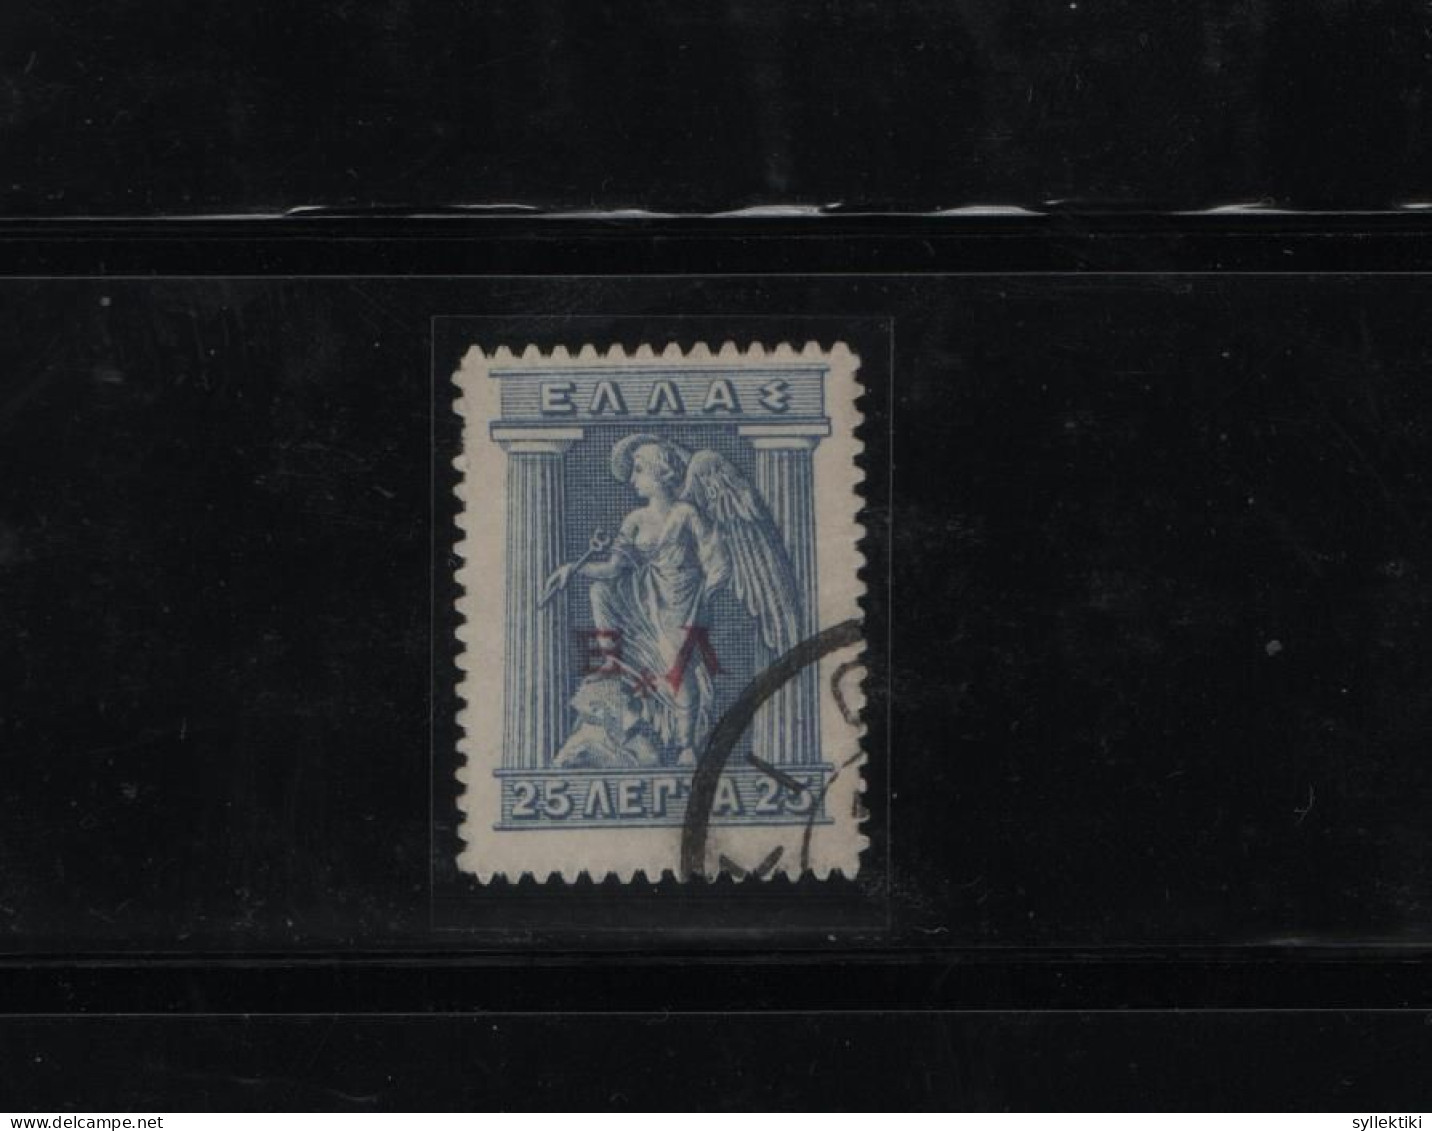 GREECE 1913 Ε.Δ.ΧΙΟΣ OVERPRINT ERROR Ε.Λ. INSTEAD OF Ε.Δ.  ON 25 LEPTA USED STAMP    HELLAS No 1a AND VALUE EURO 420.00 - Chios (Hios)